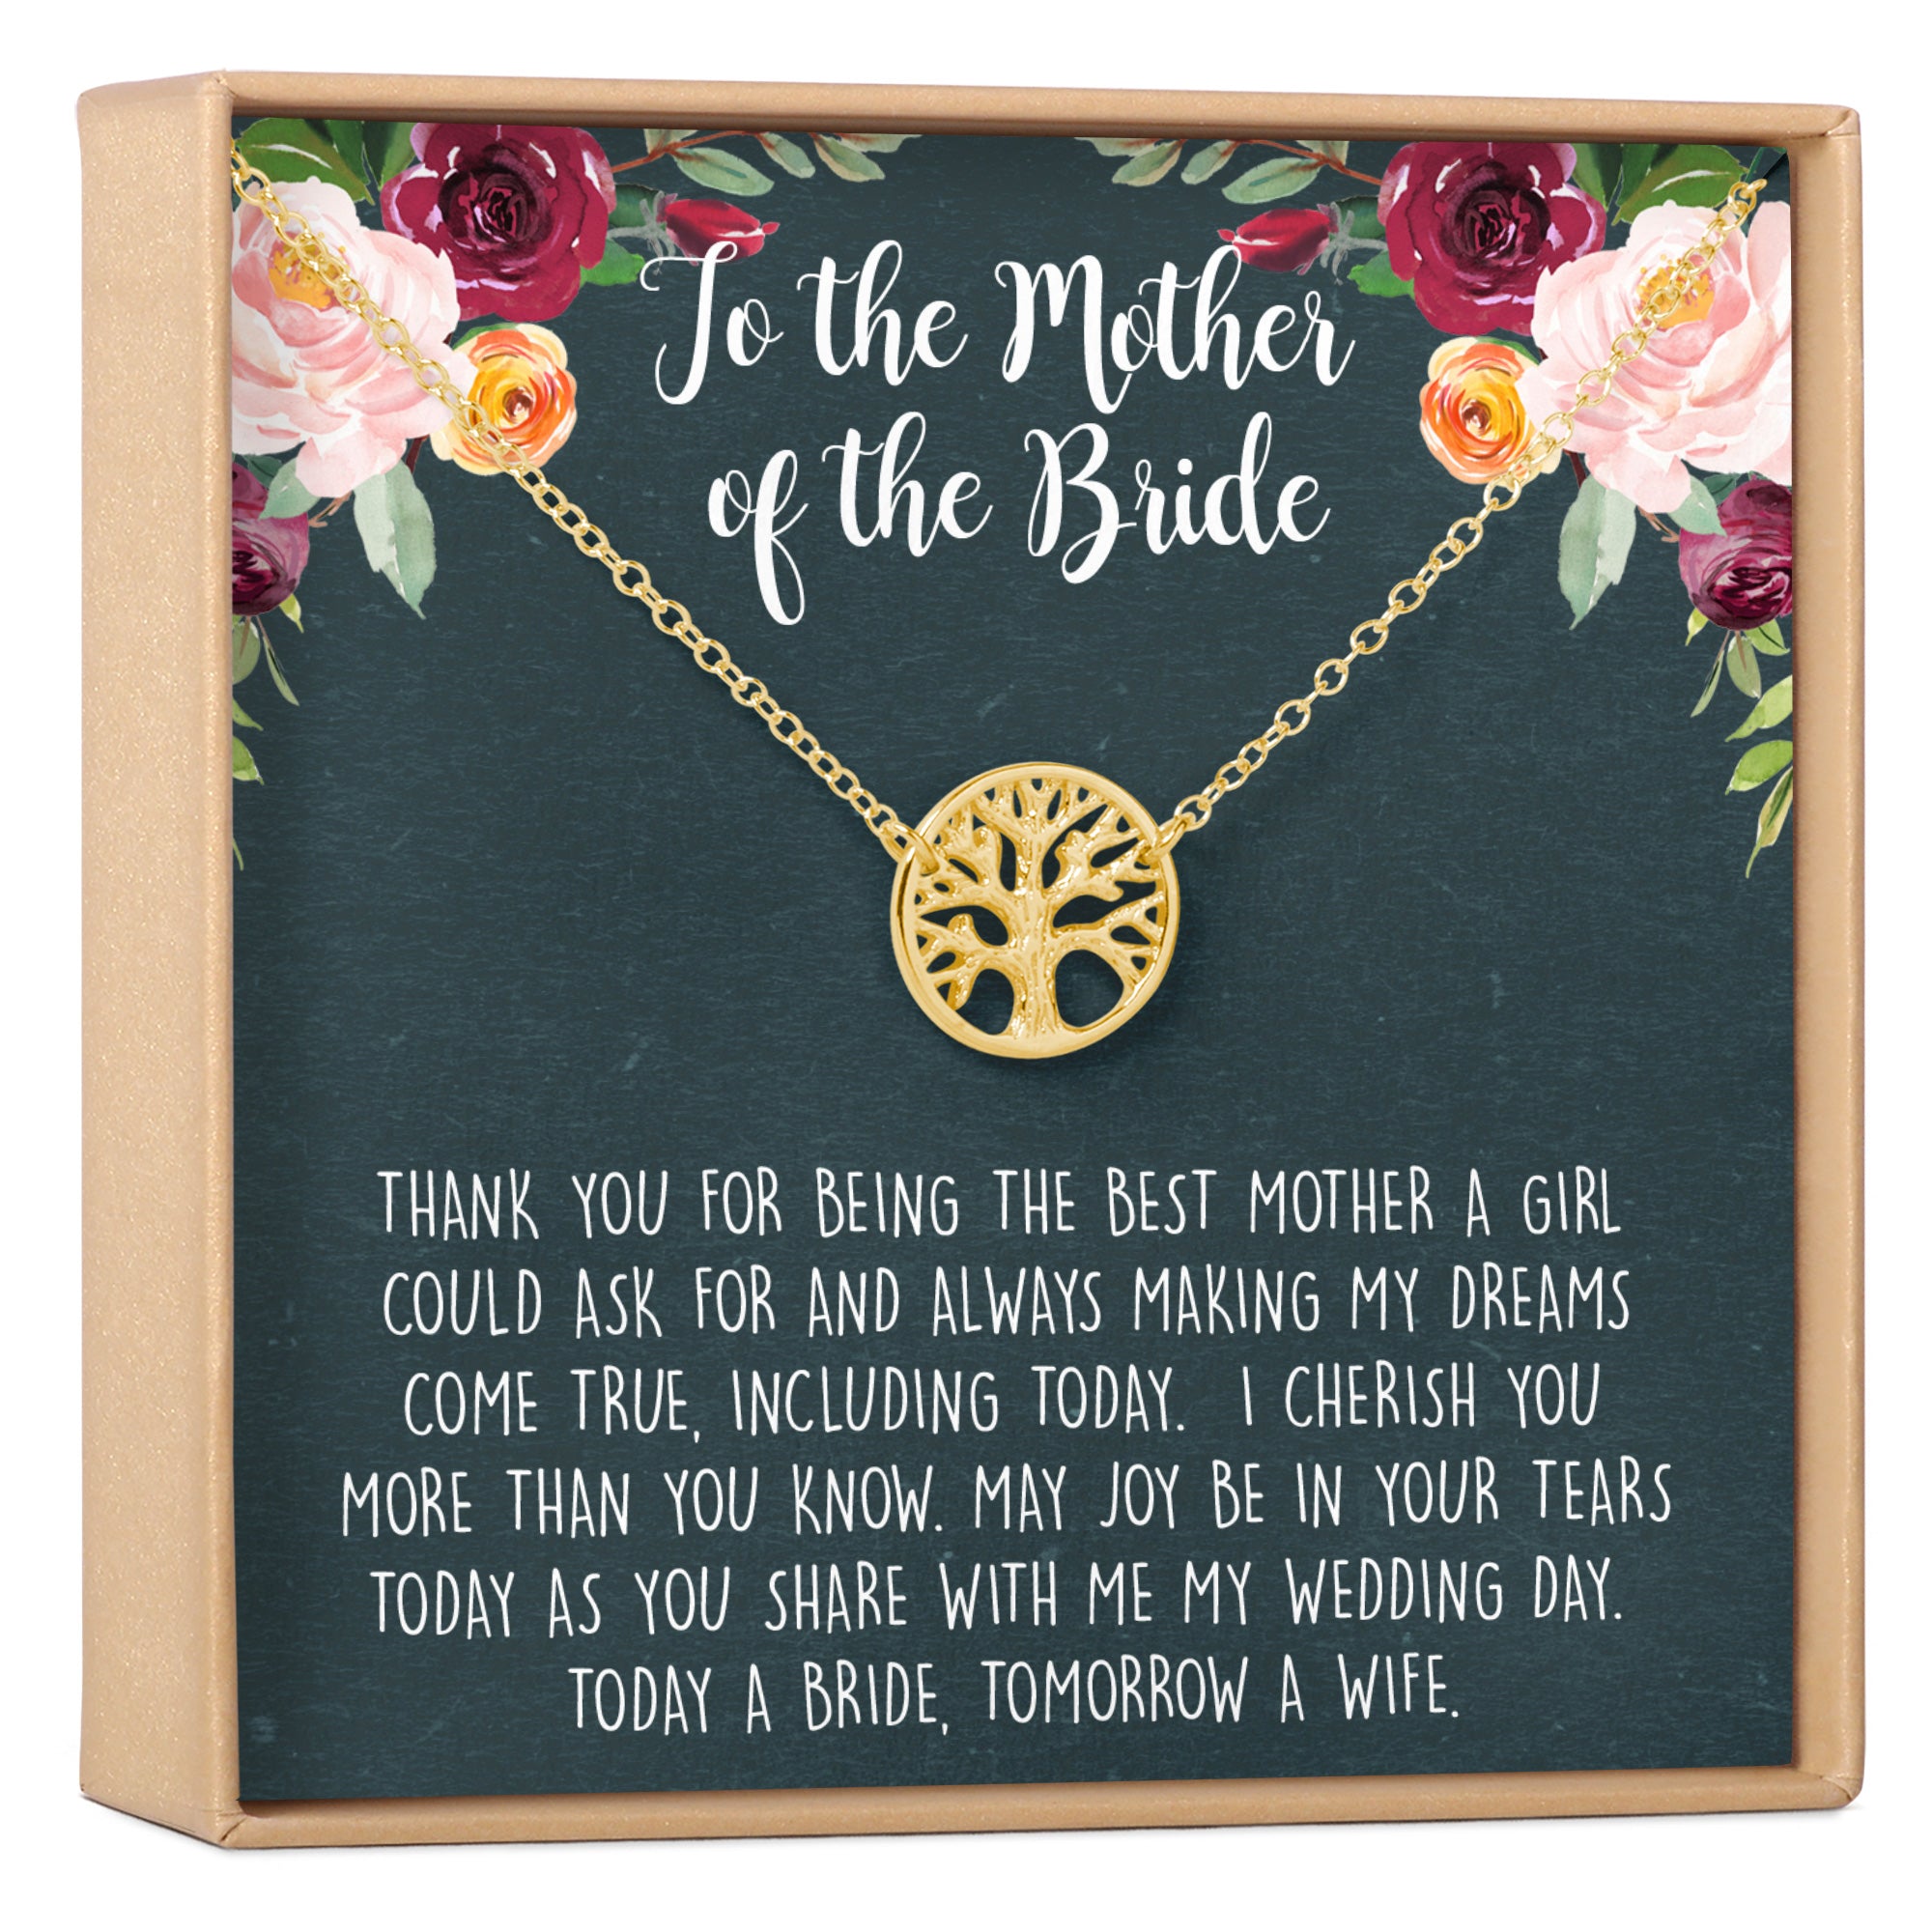 Mother of the Bride Necklace Gift From Groom on Wedding Day, Message Poem  Jewelry Gift Box for Mother in Law From Son in Law - Etsy